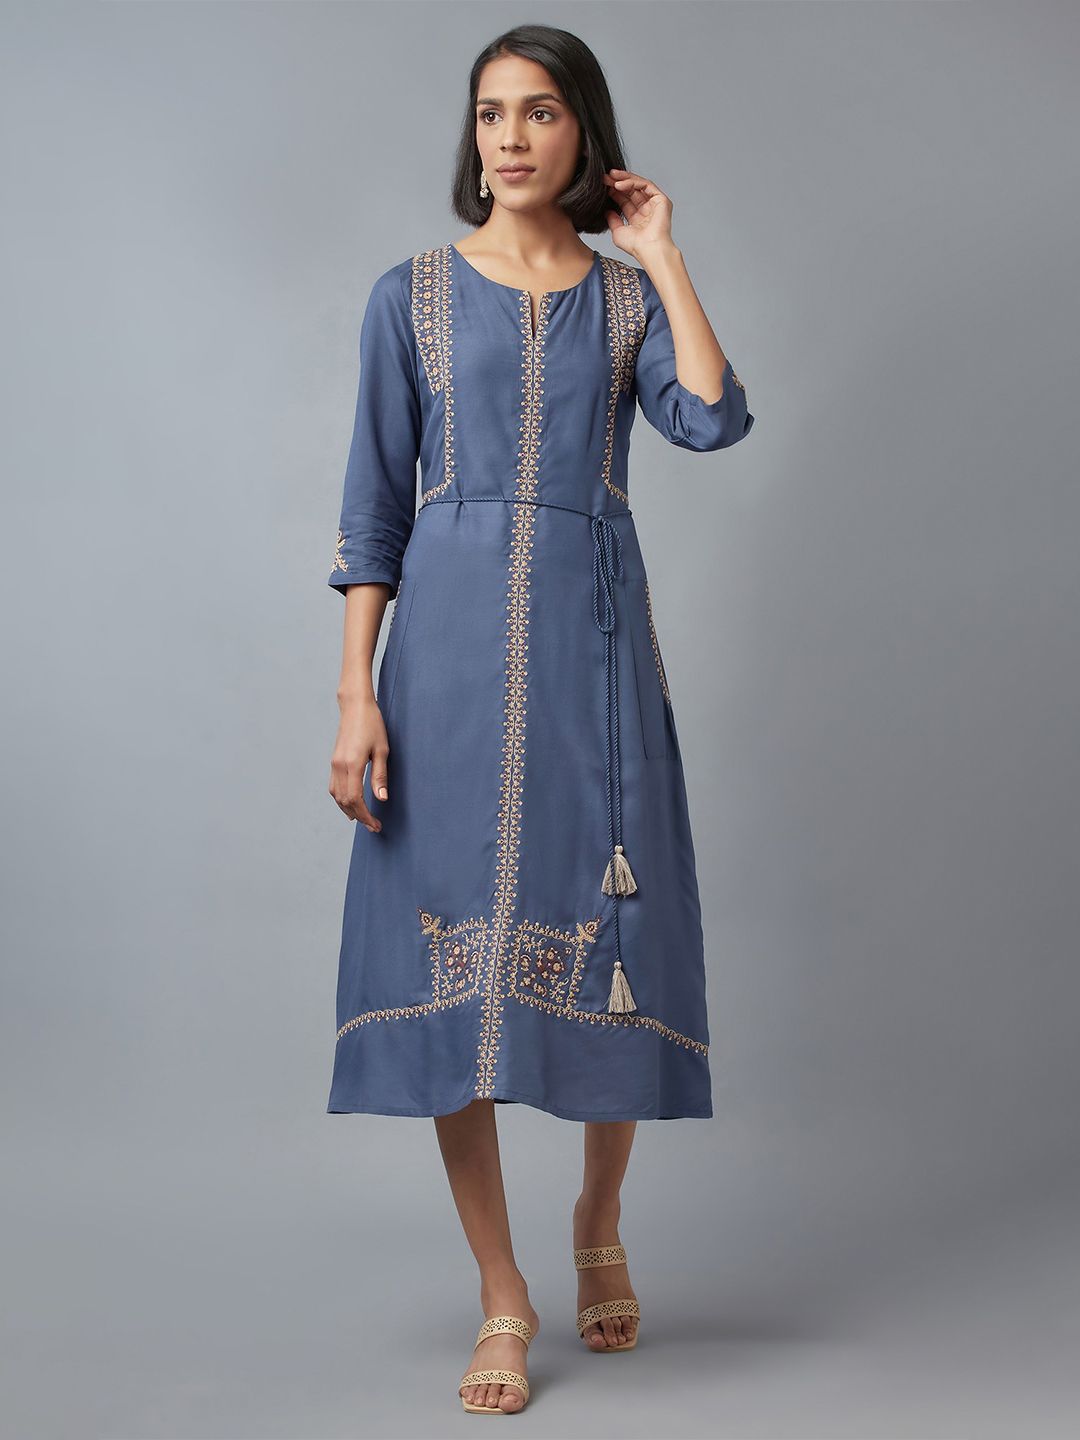 W Women Blue Ethnic Motifs Embroidered A-Line Midi Dress Price in India